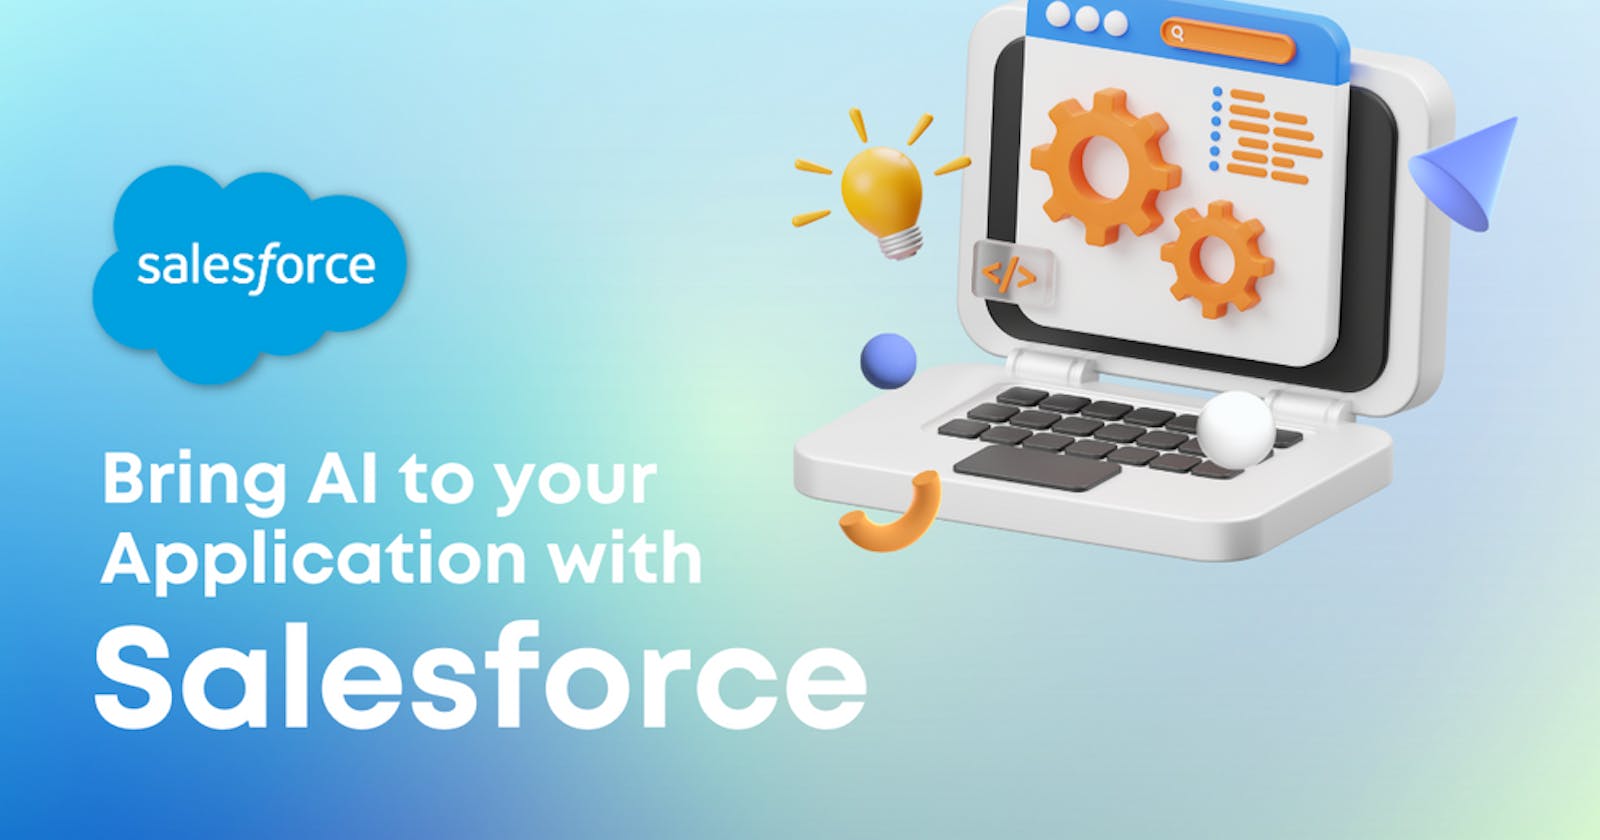 A Step-by-Step Guide to bring AI to your Project in Salesforce